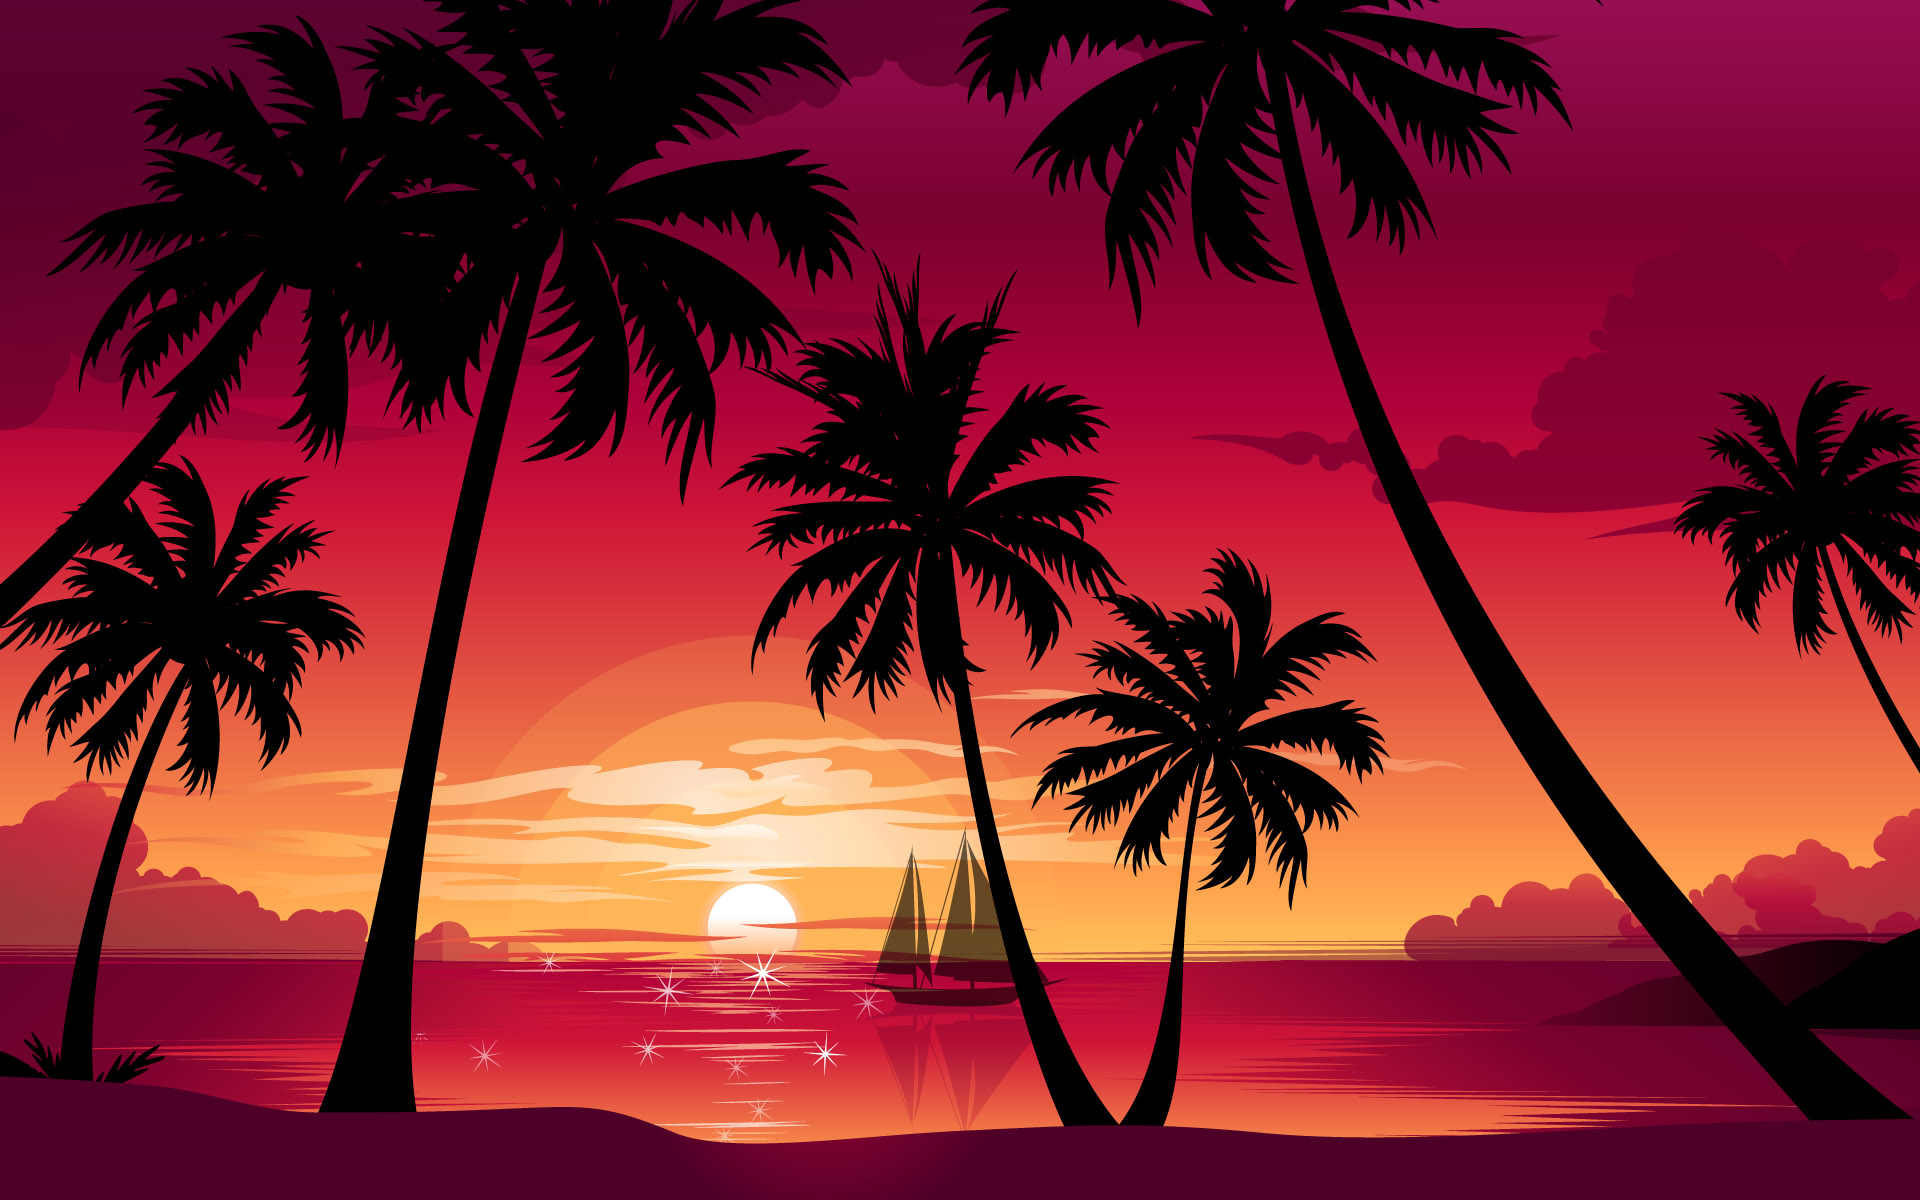 Sunset Backgrounds free download | Wallpapers, Backgrounds, Images ...